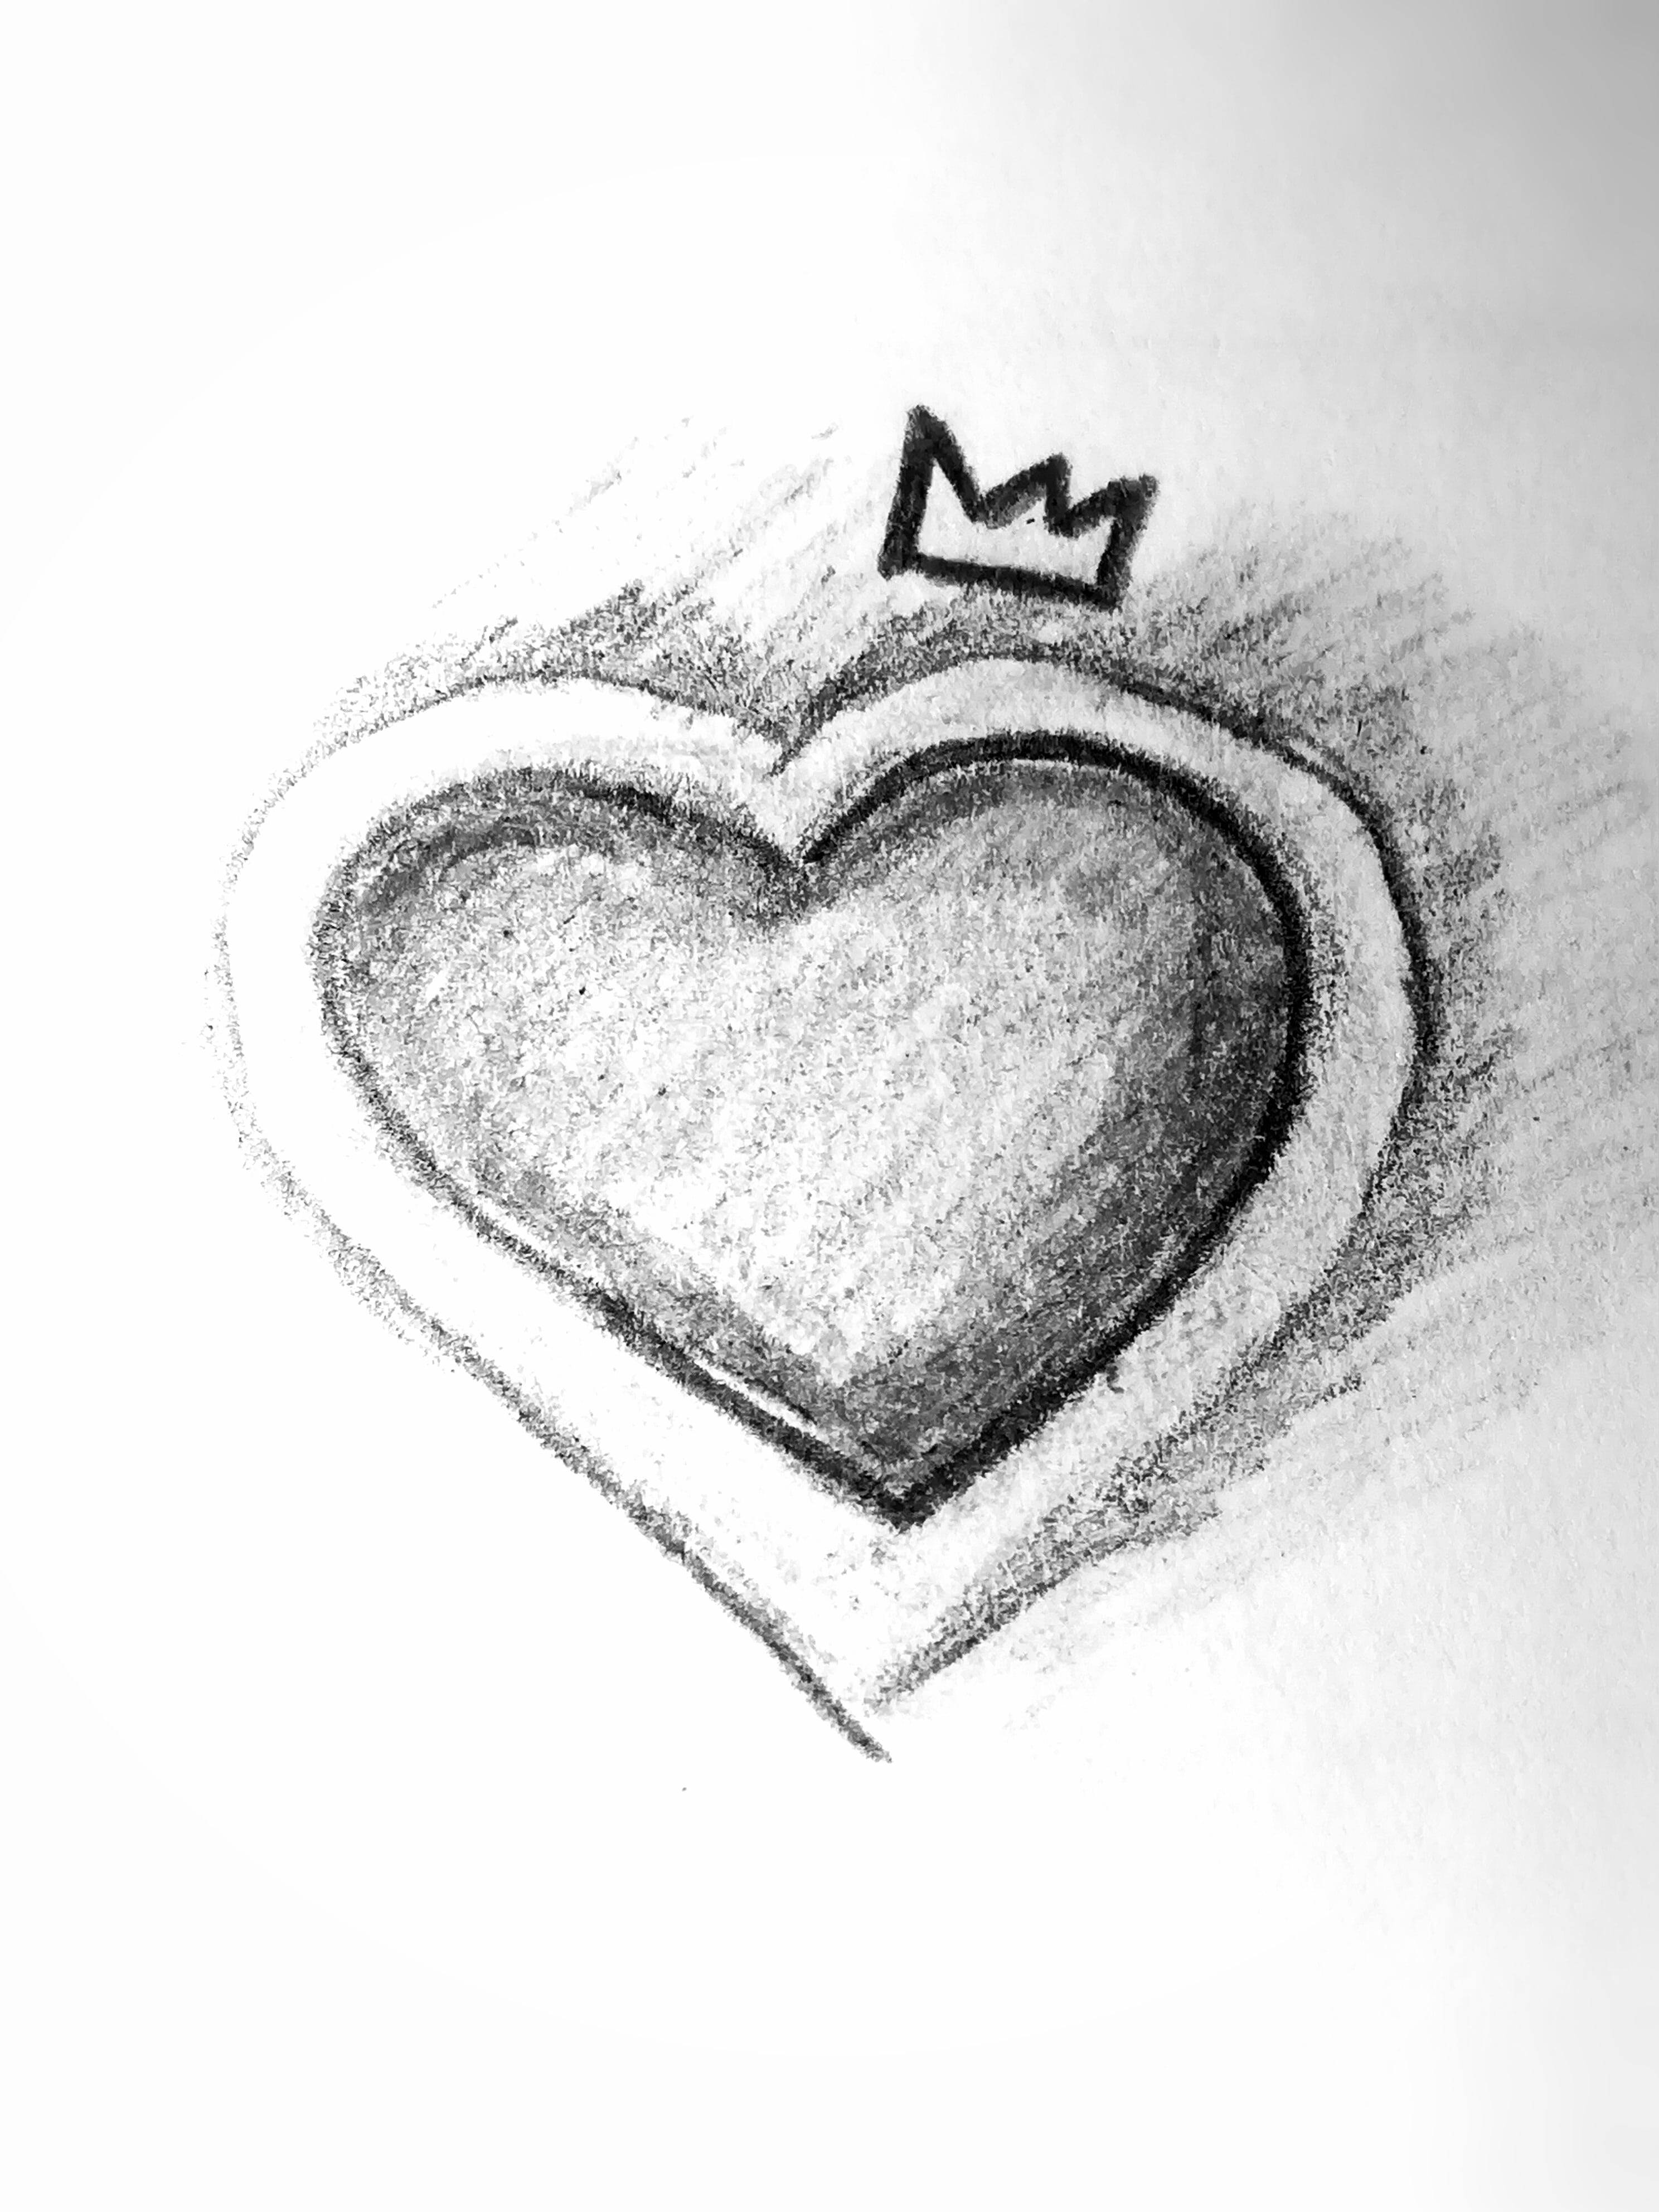 Download Black And White Heart Sketch Wallpaper 